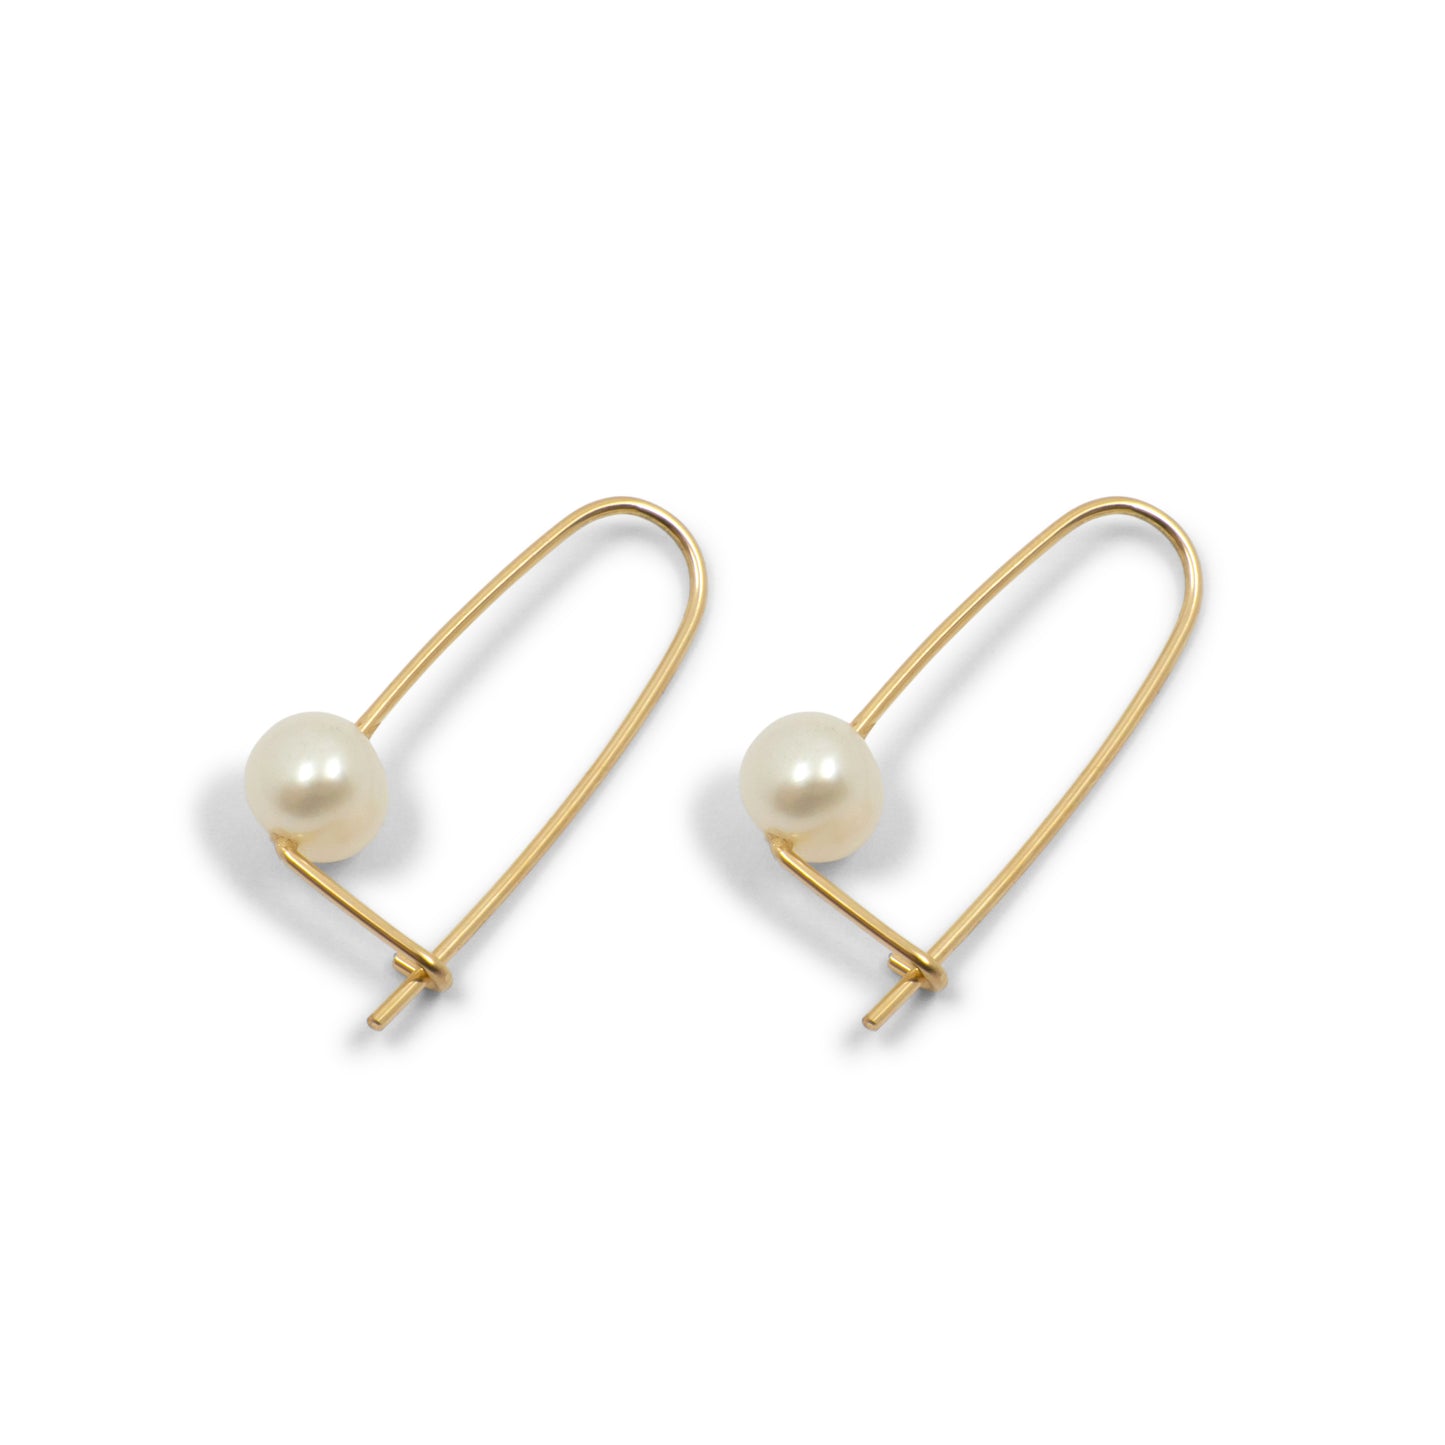 Pearl Wire Safety Pin Earring (Minimal) - Sterling Silver & Gold Filled - Futaba Hayashi